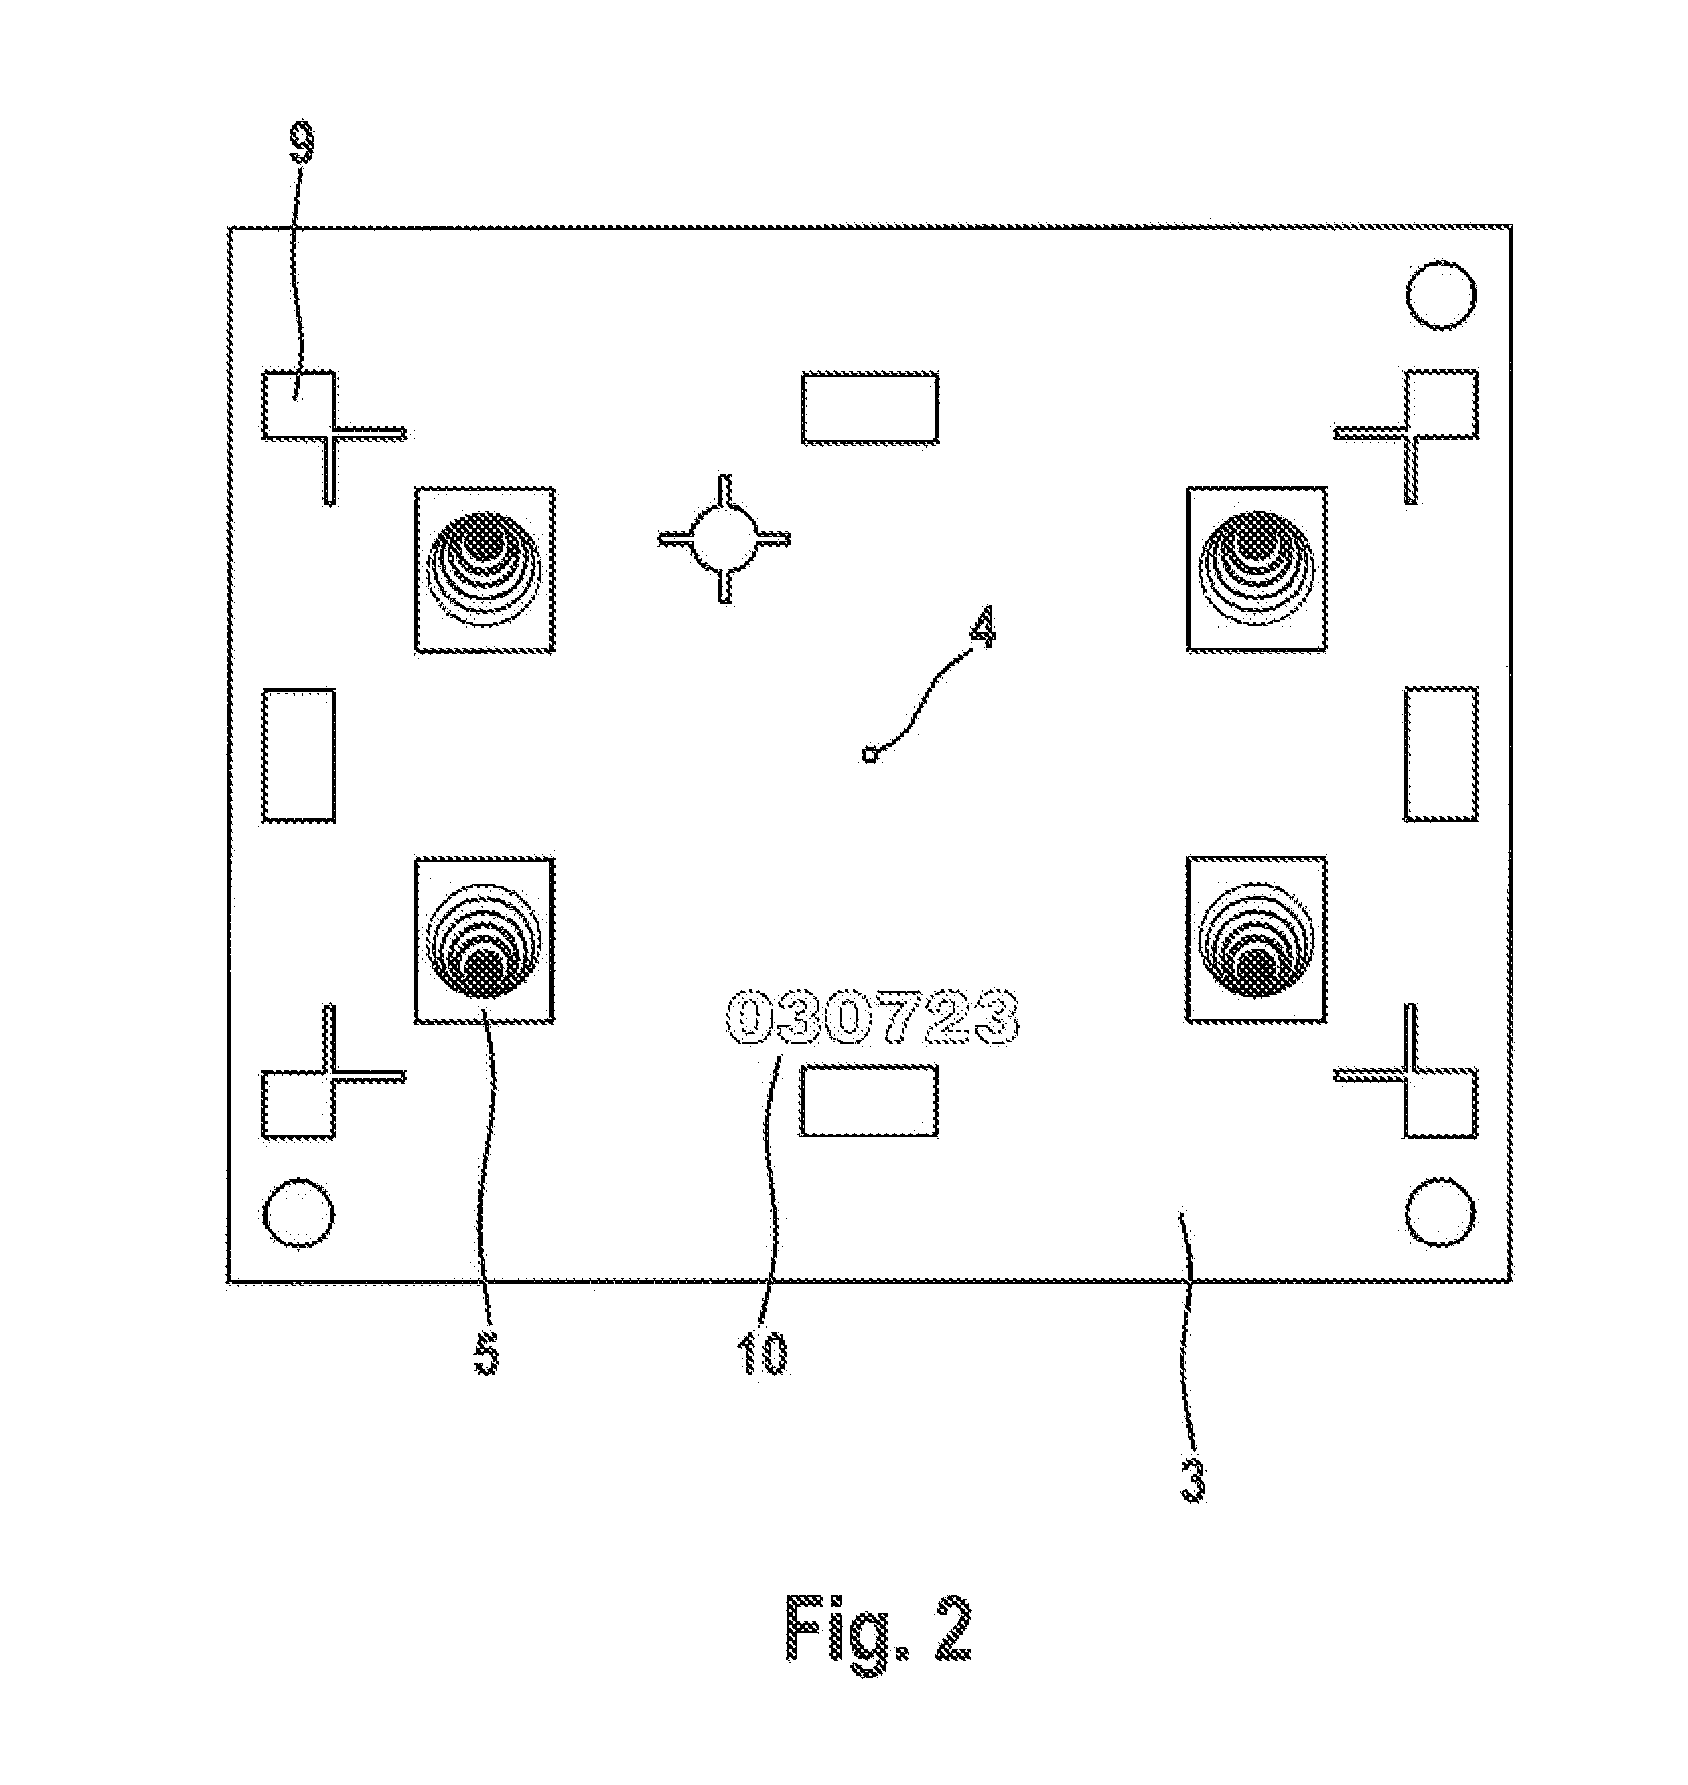 System and method for optically imaging objects on a detection device by a pinhole aperture